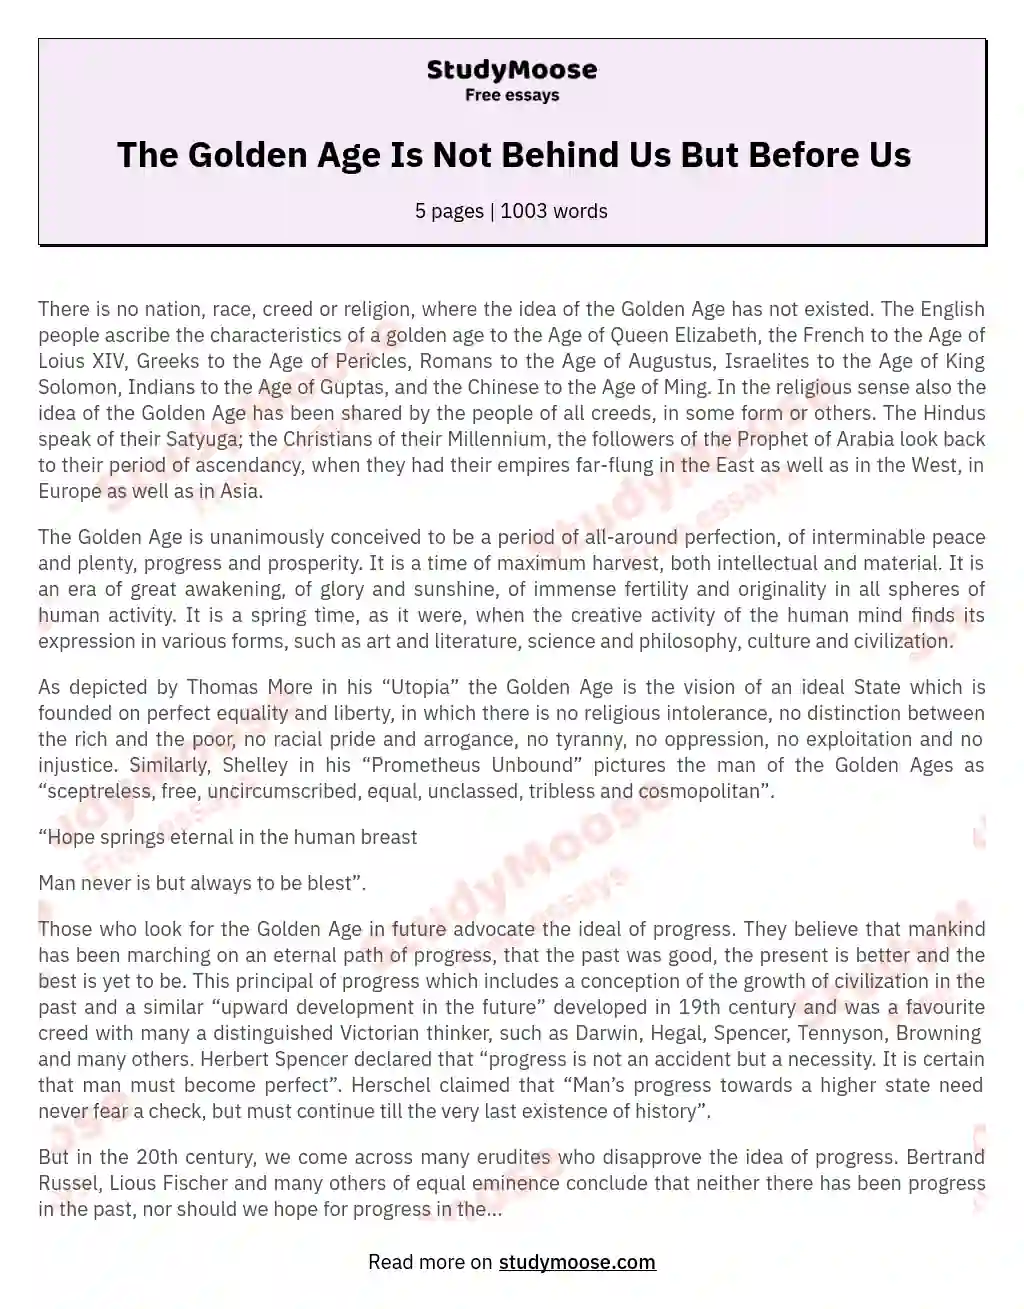 The Golden Age Is Not Behind Us But Before Us